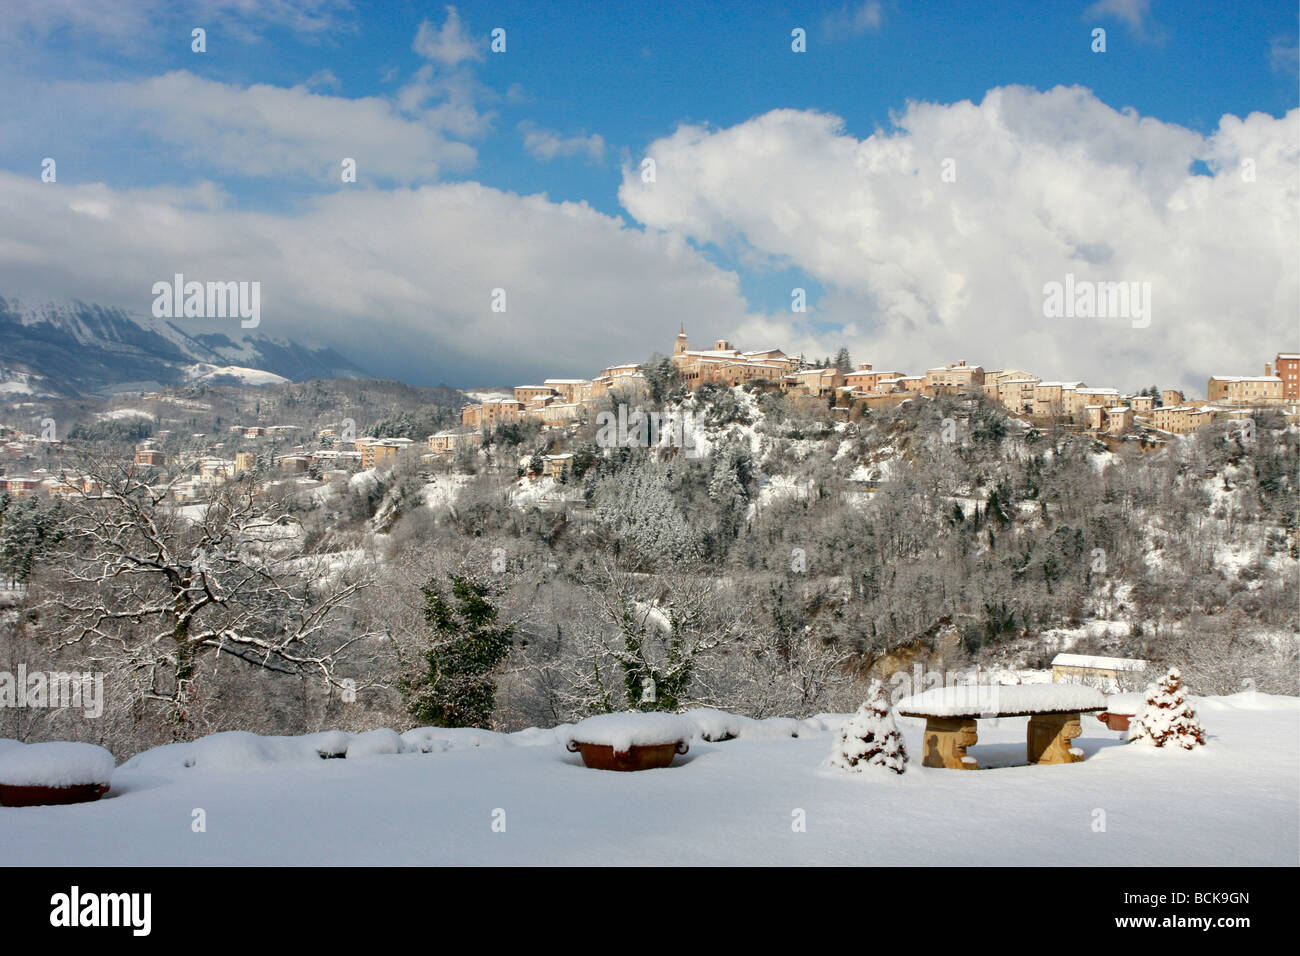 Charming,historic hilltown of Amandola in Le Marche,(Marches), Italy makes a beautiful picture in the snow Stock Photo